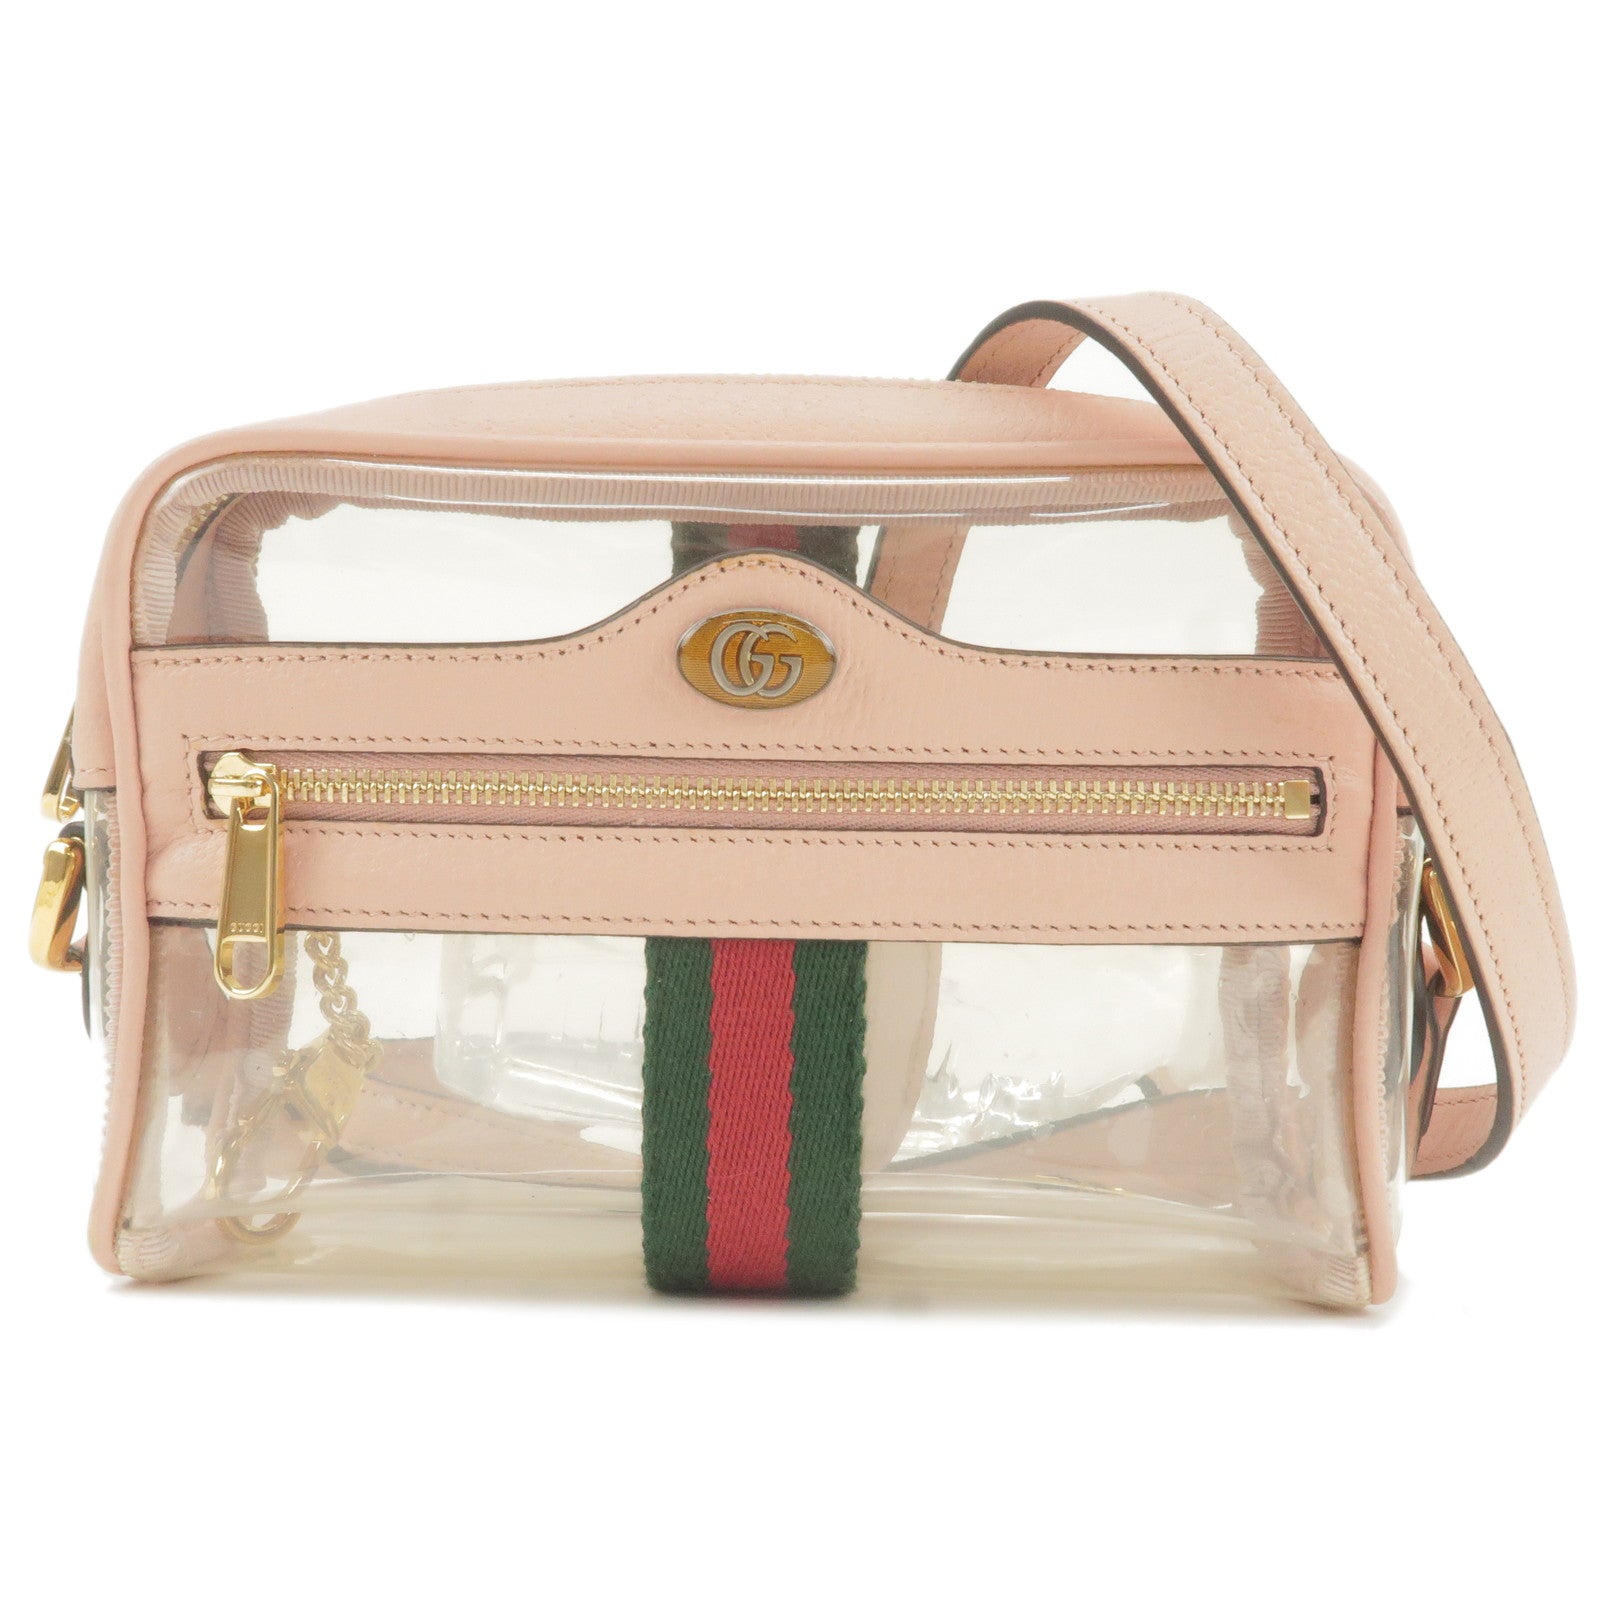 Gucci Hysteria Large Leather Top Handle Bag Purse | Leather top, Purses and  bags, Top handle bag